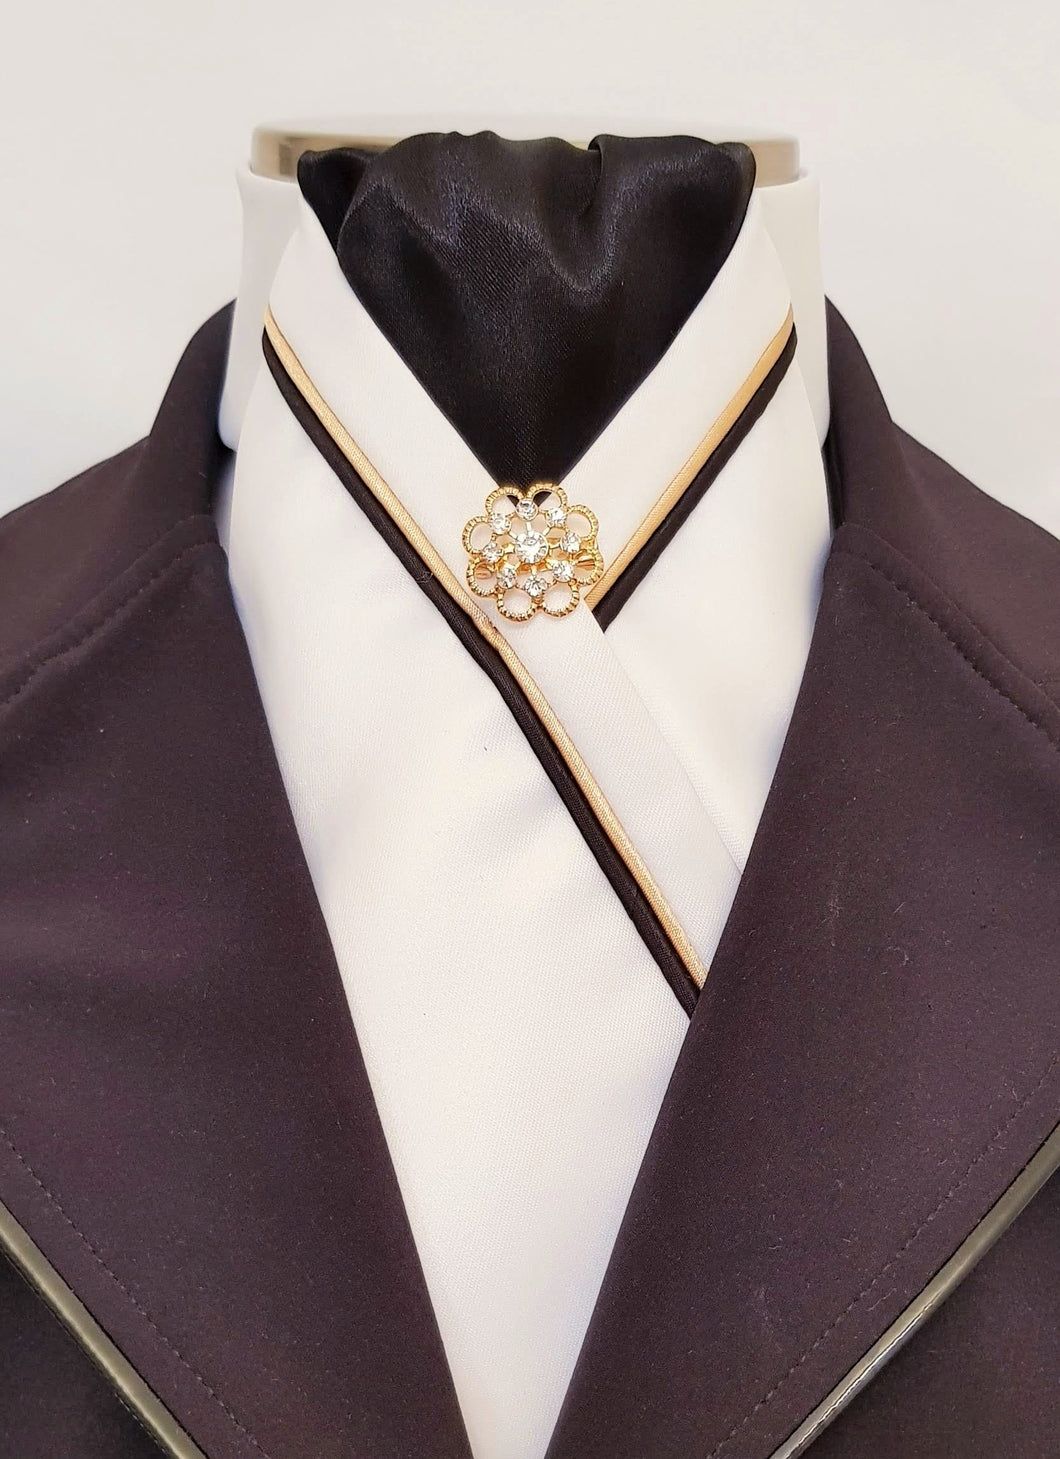 ERA RACHAEL STOCK TIE - Cream satin and black, with gold & black piping and brooch